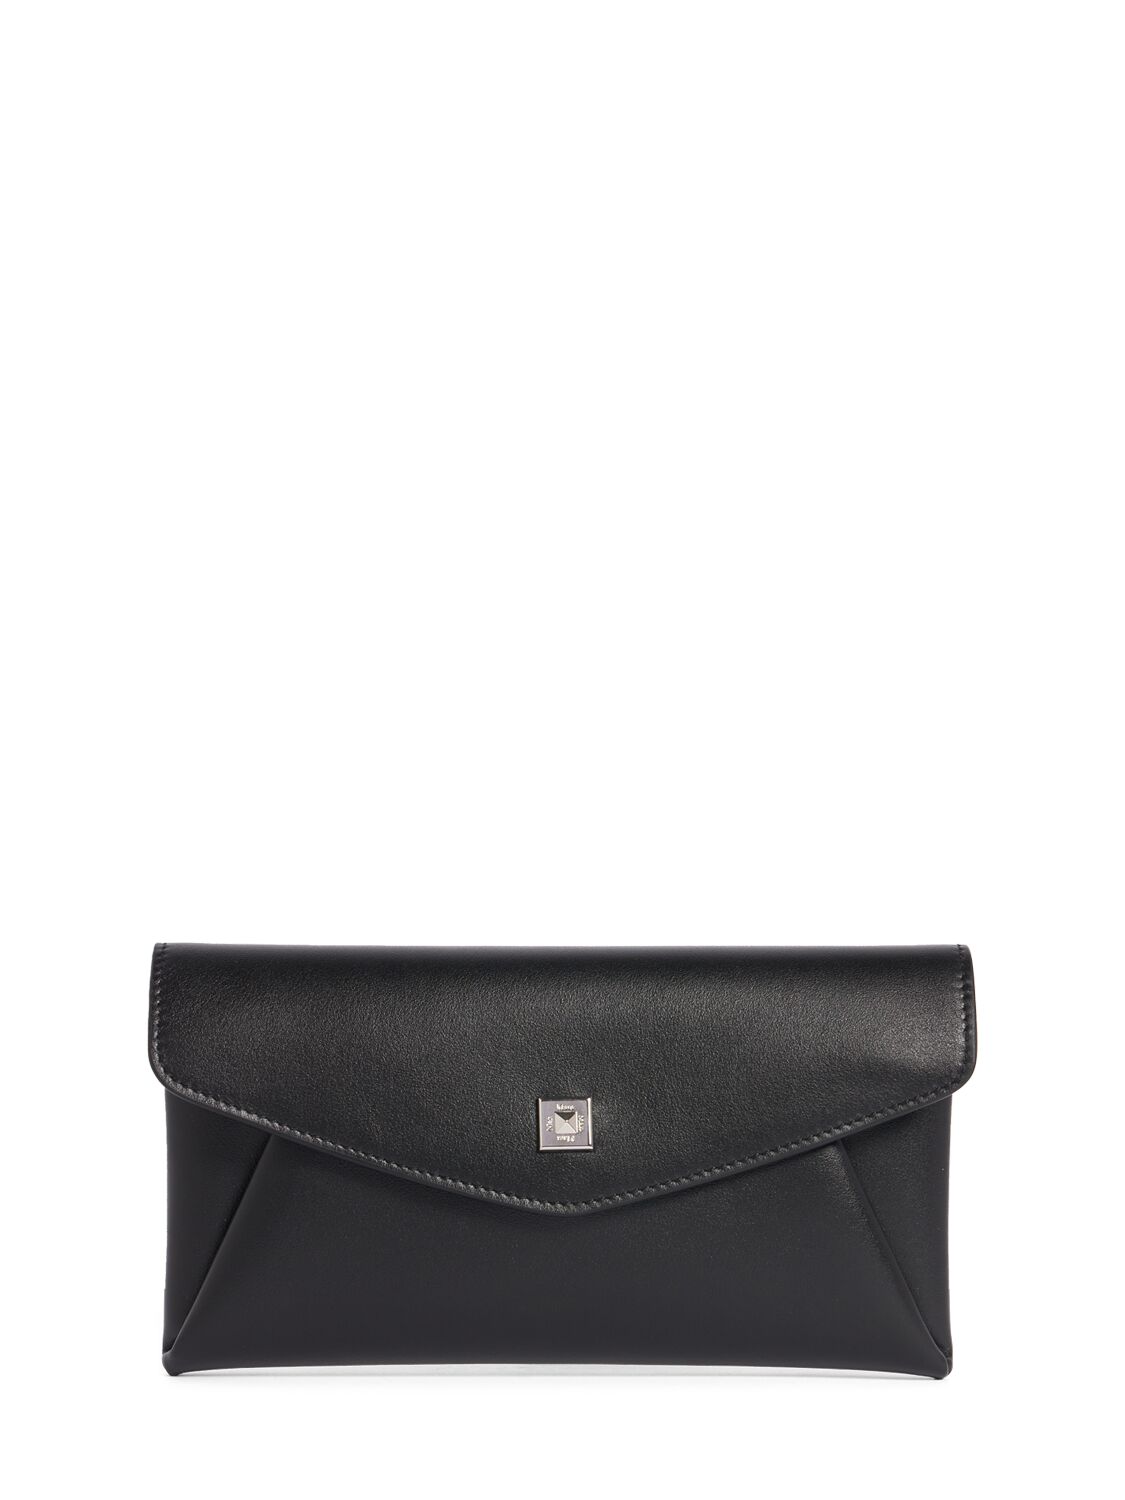 Max Mara Leather Wallet W/ Chain In Black